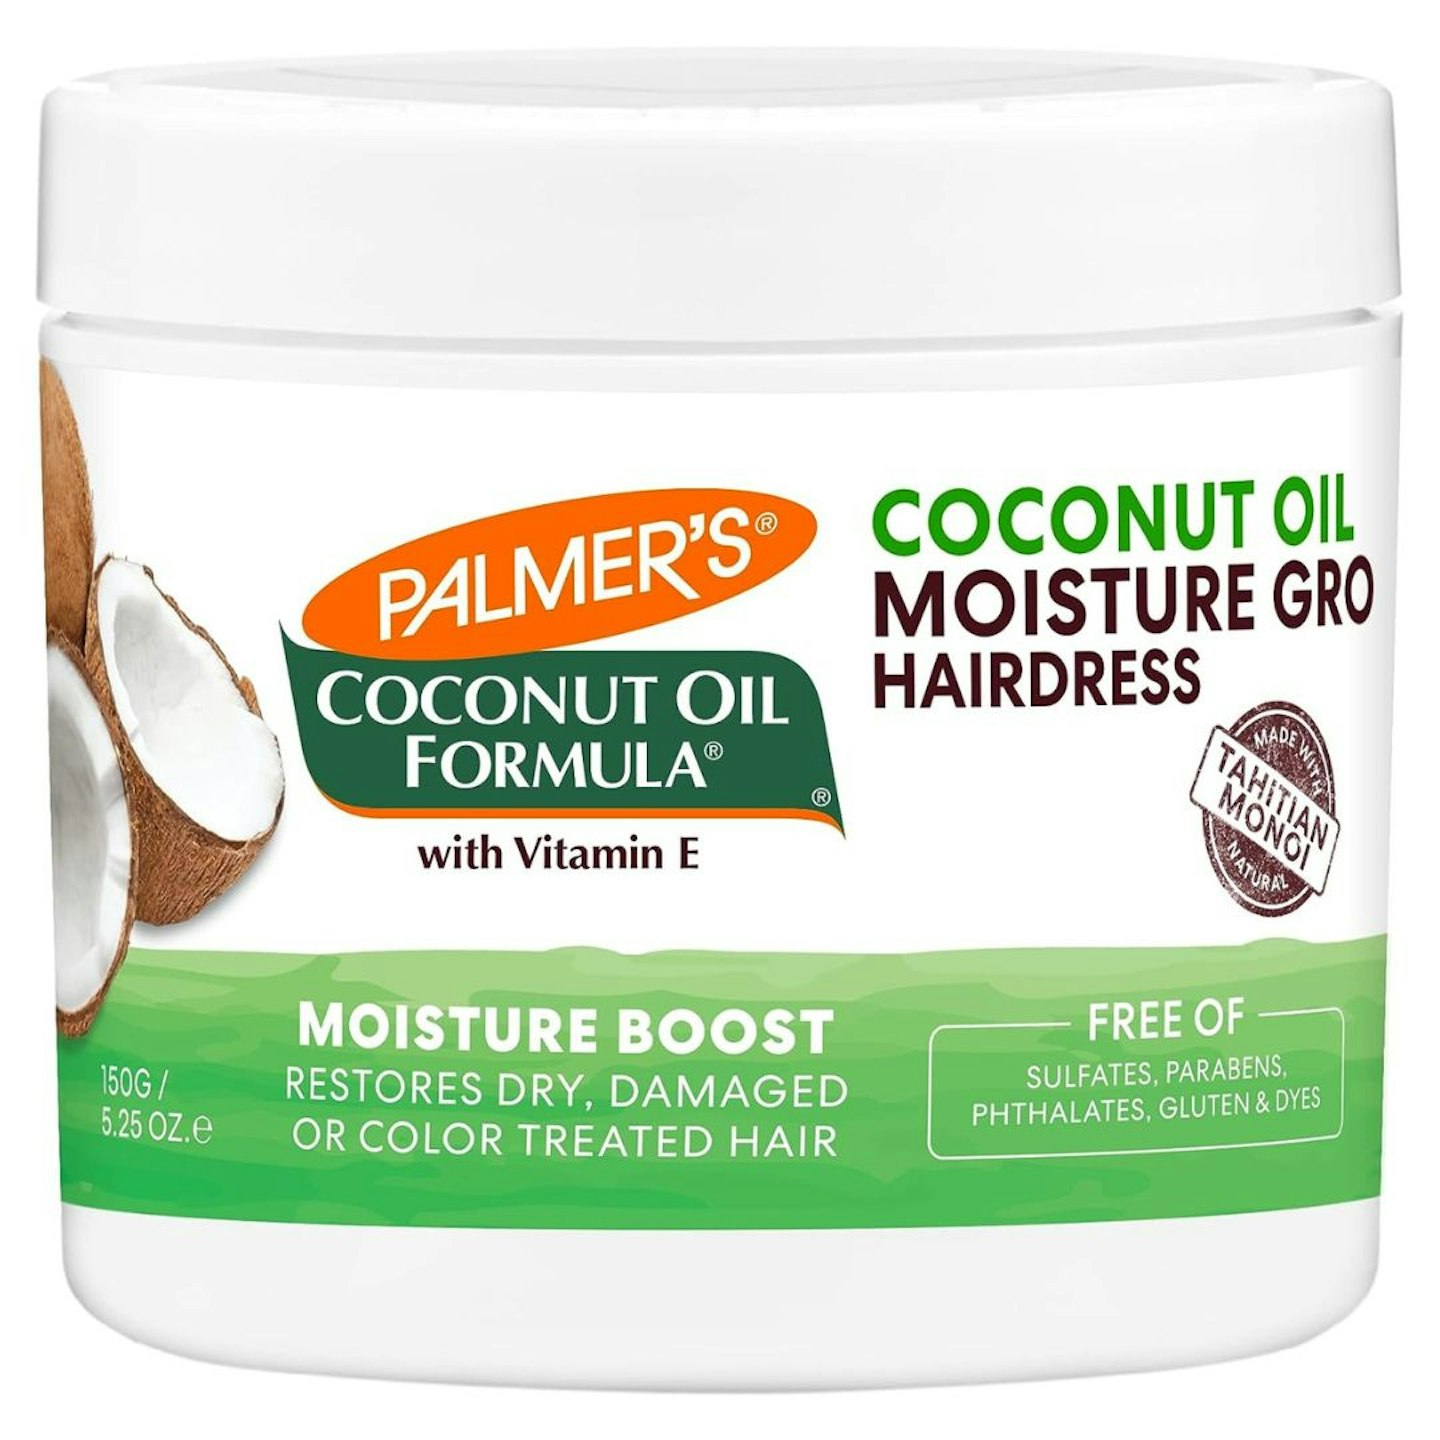 Palmer's Coconut Oil Formula Moisture-Gro Conditioning Hairdress